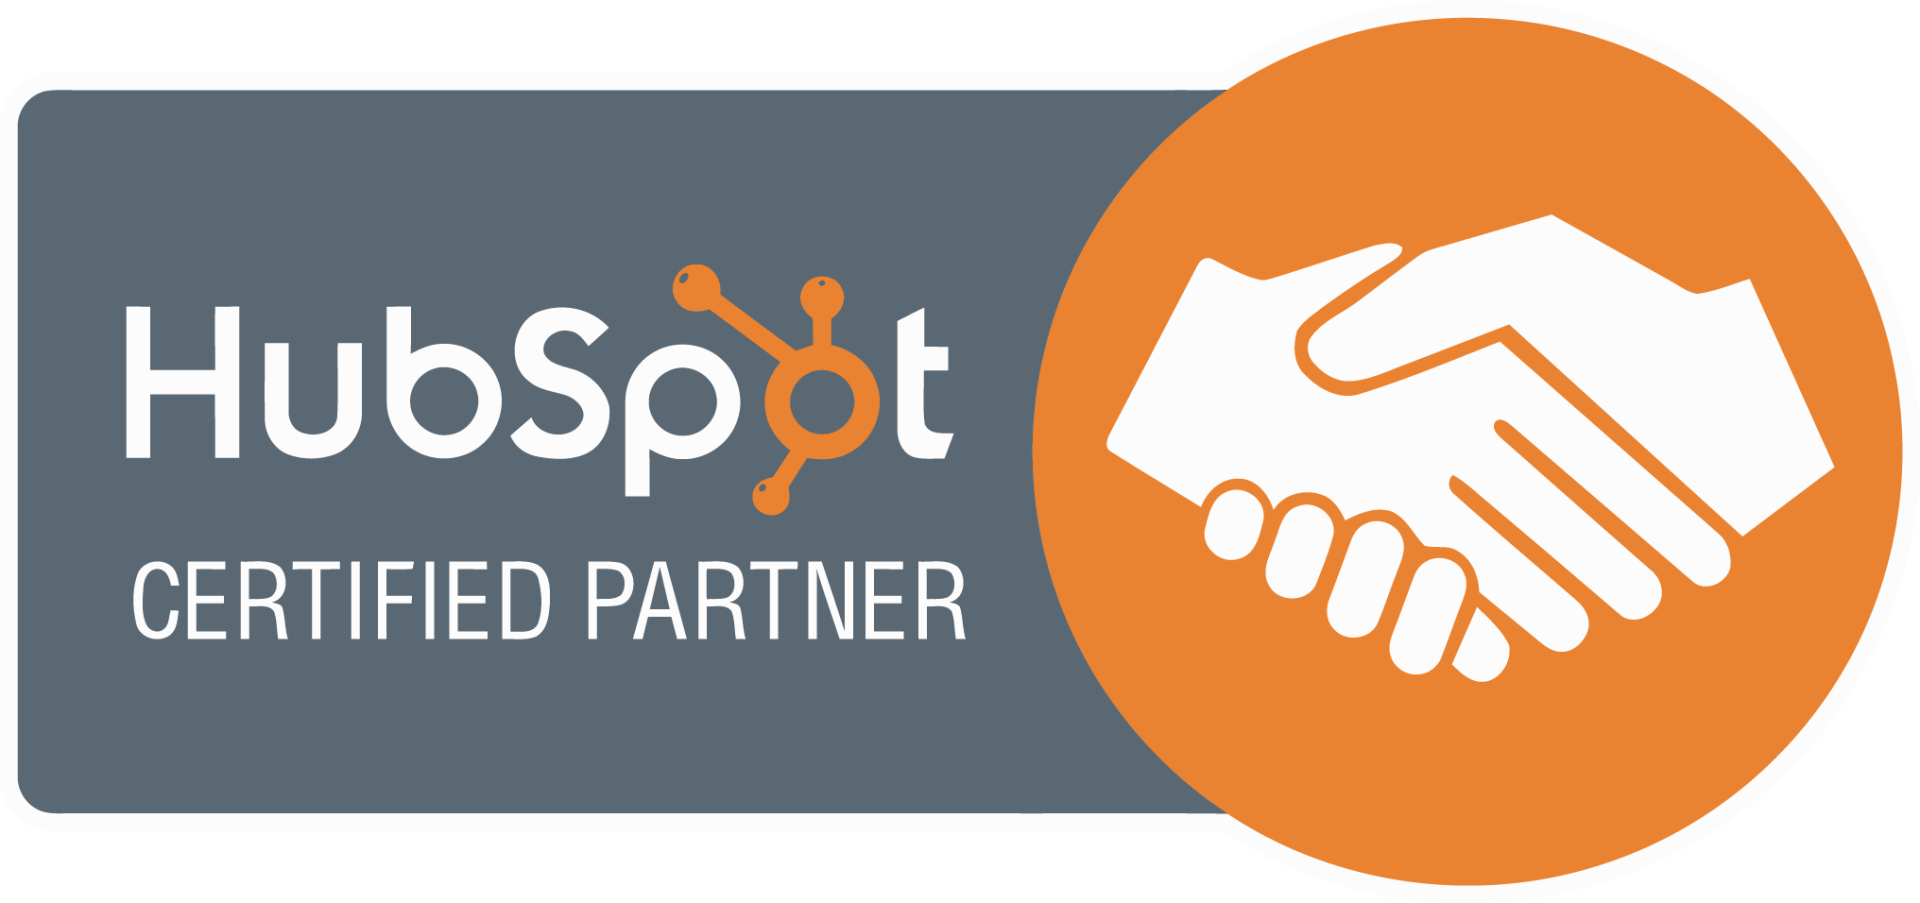 PMI is a HubSpot Certified Partner Offering the Latest Web Design and Internet Marketing Technology and Support